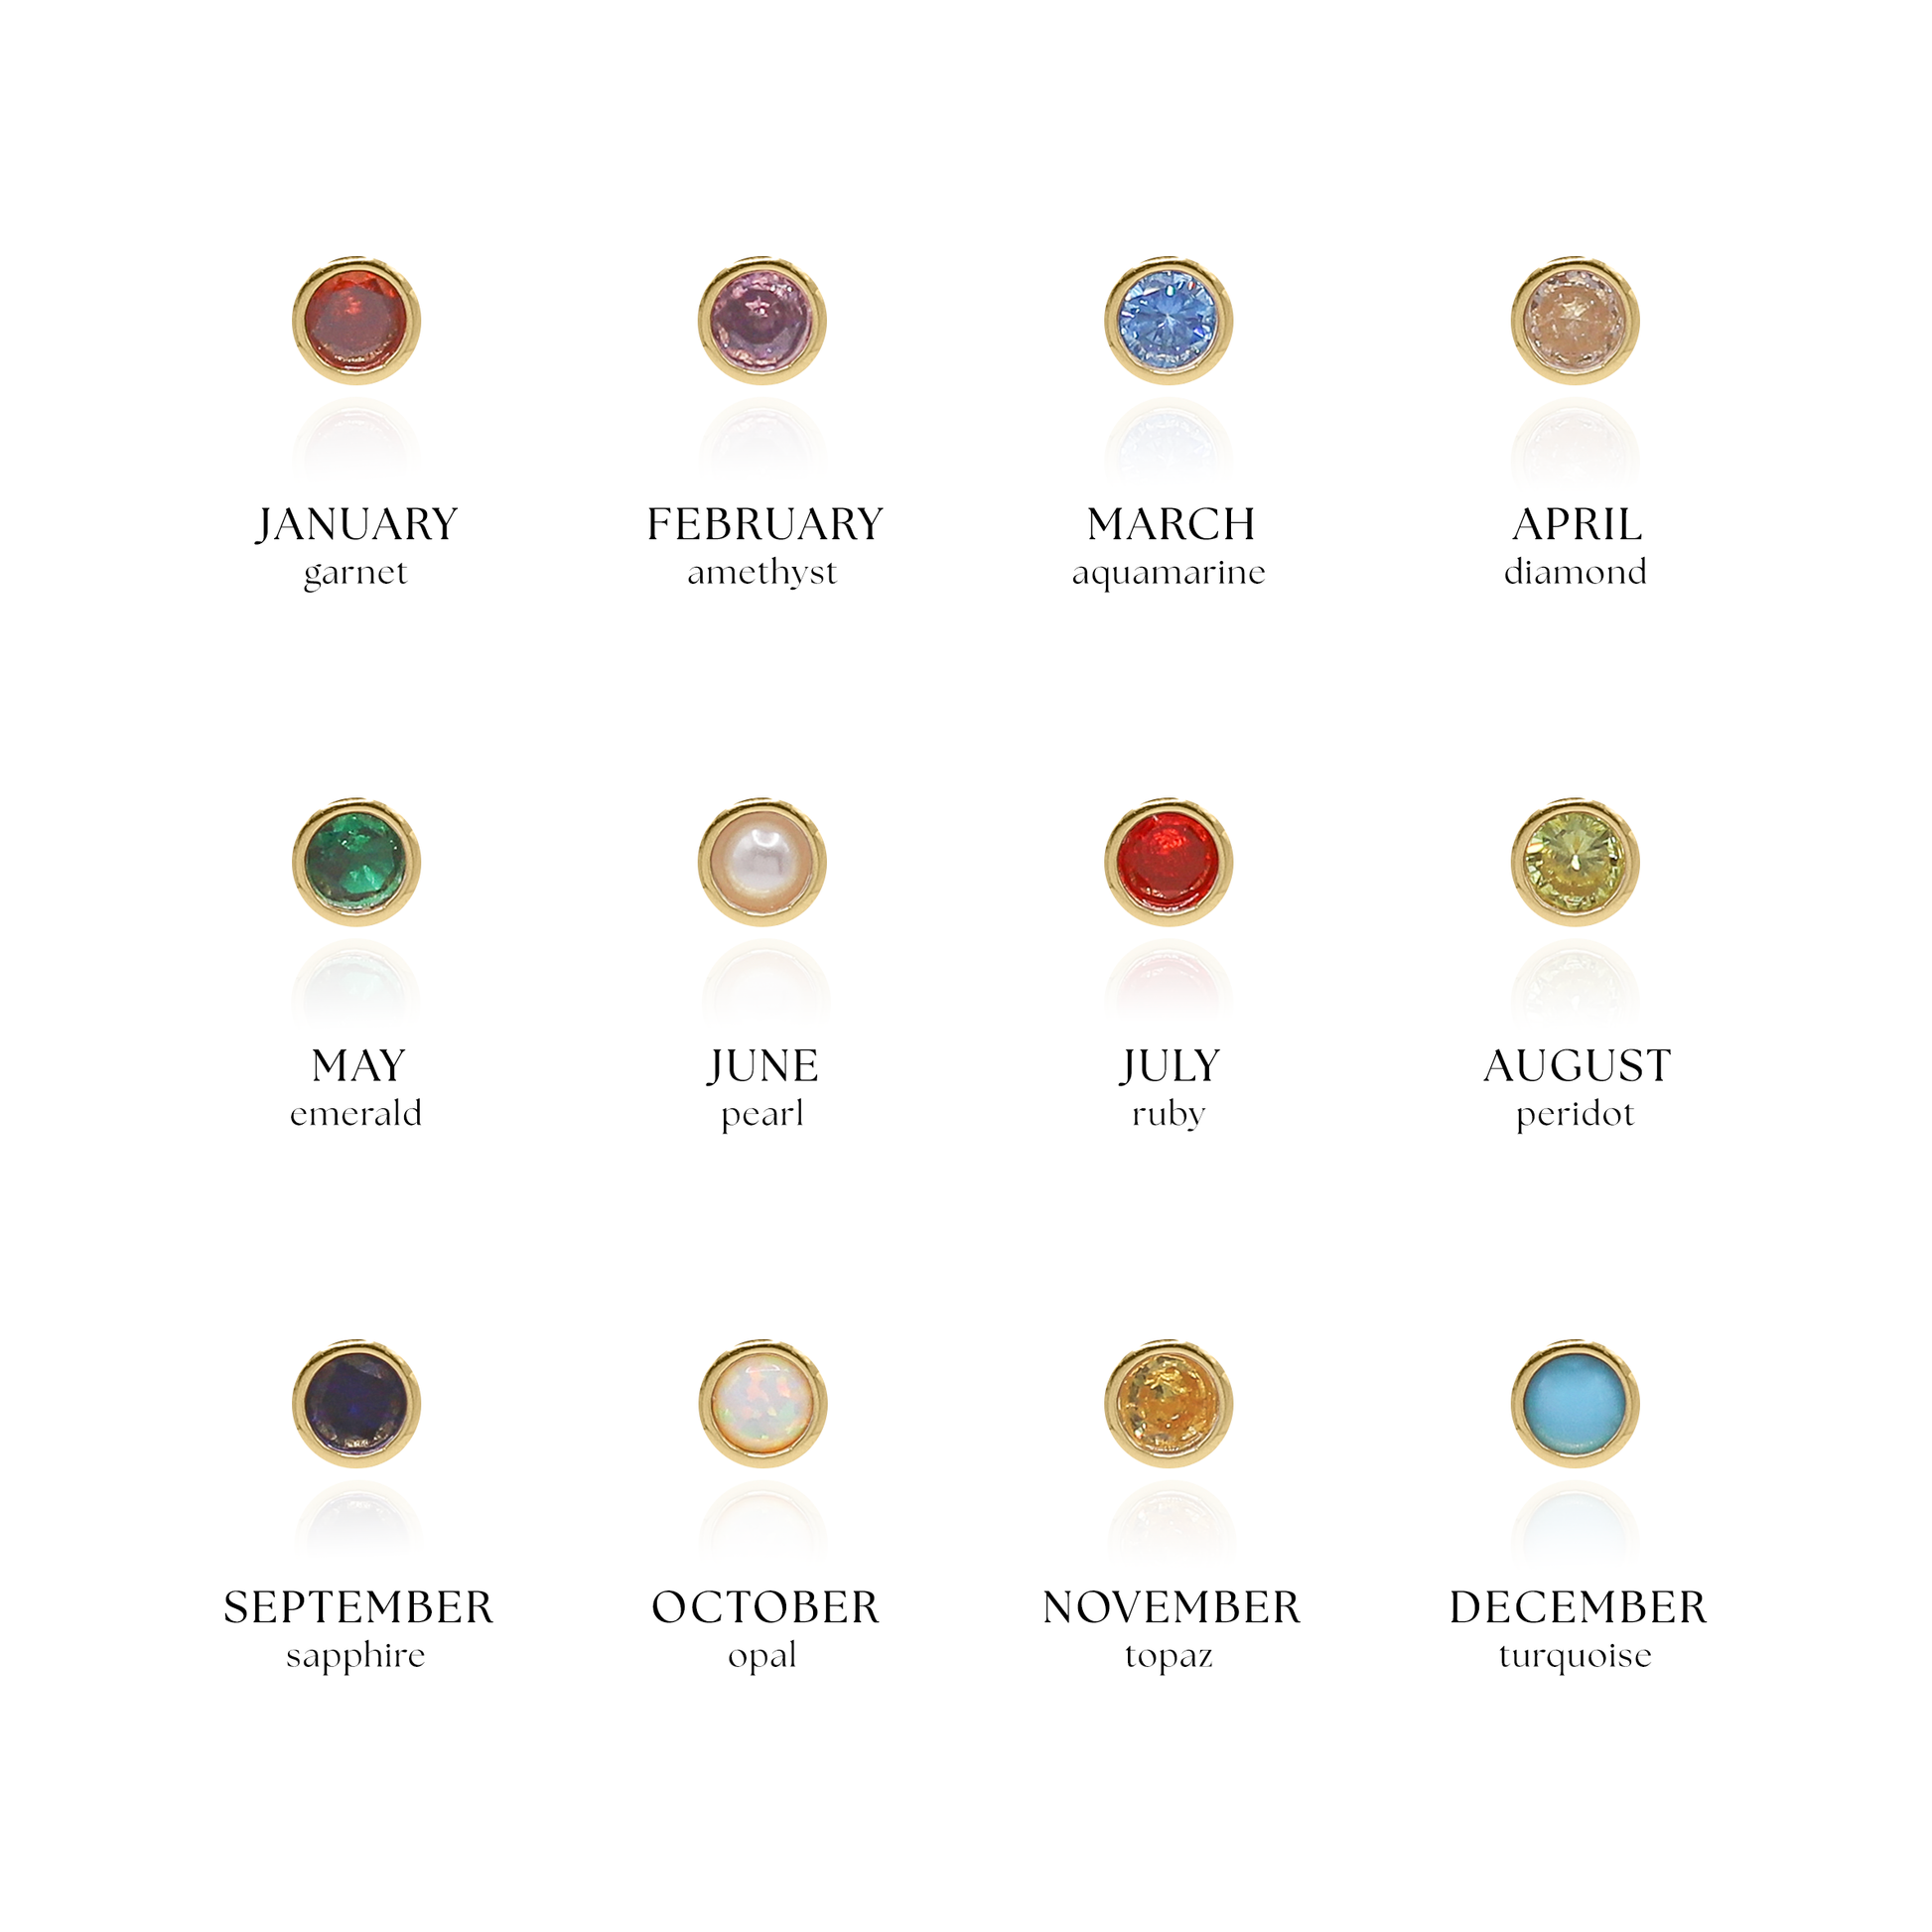 Star Birthstone Ring Gift Set | Earrings Necklace & Ring | 18K Gold Plated